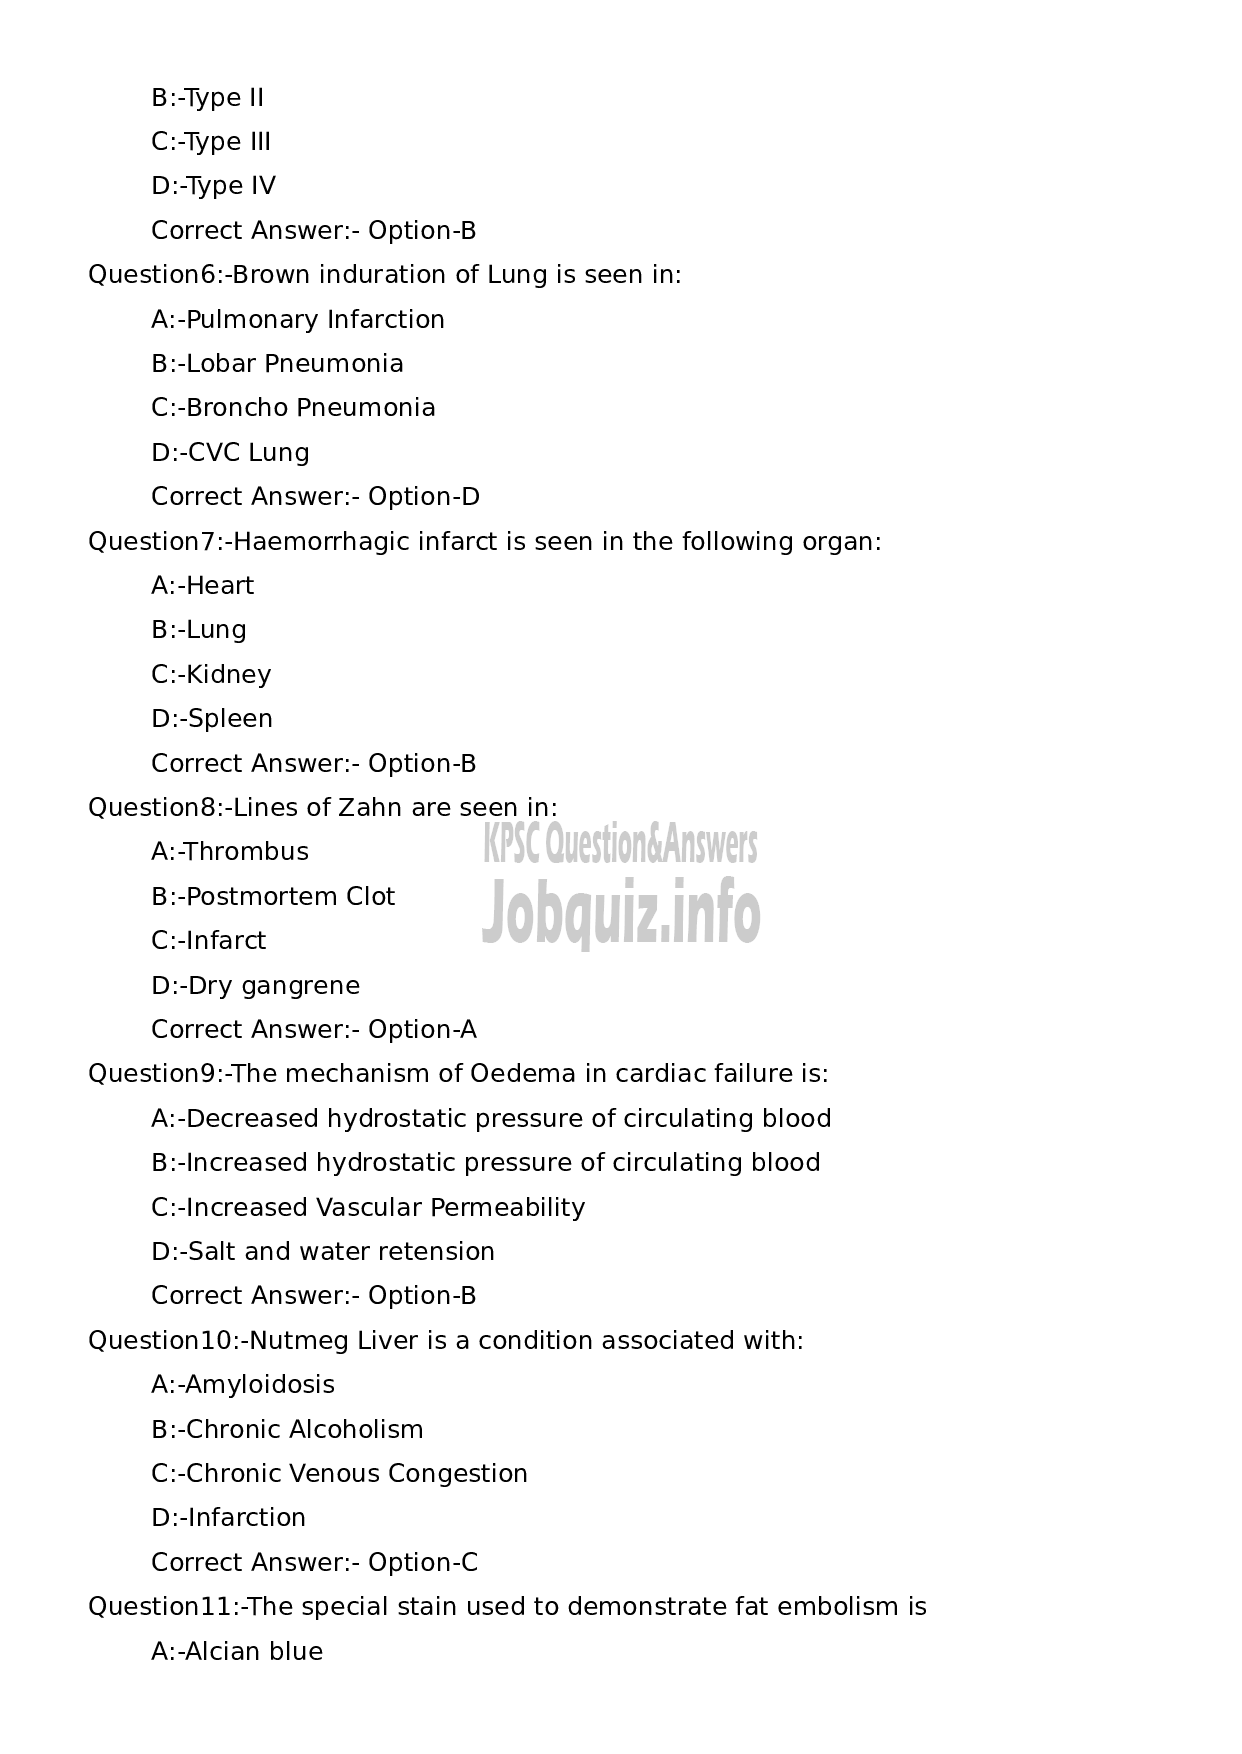 Kerala PSC Question Paper - Assistant Professor Pathology and Microbiology-2